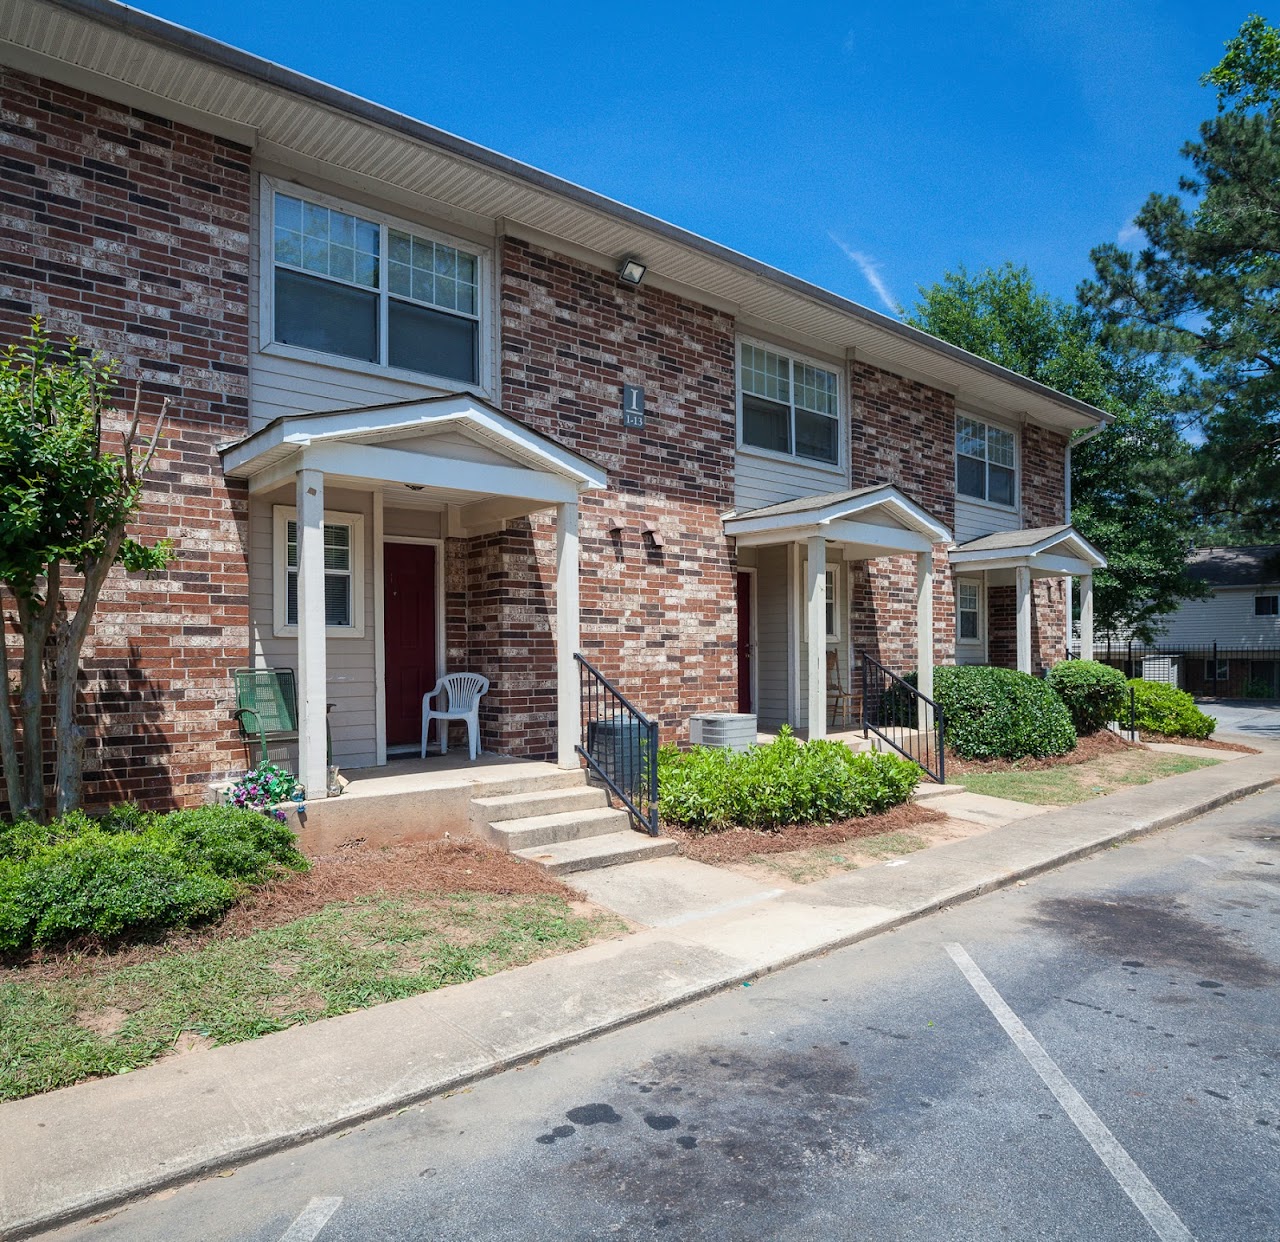 Photo of TOWNE WEST MANOR. Affordable housing located at 330 BROWNLEE RD SW ATLANTA, GA 30311